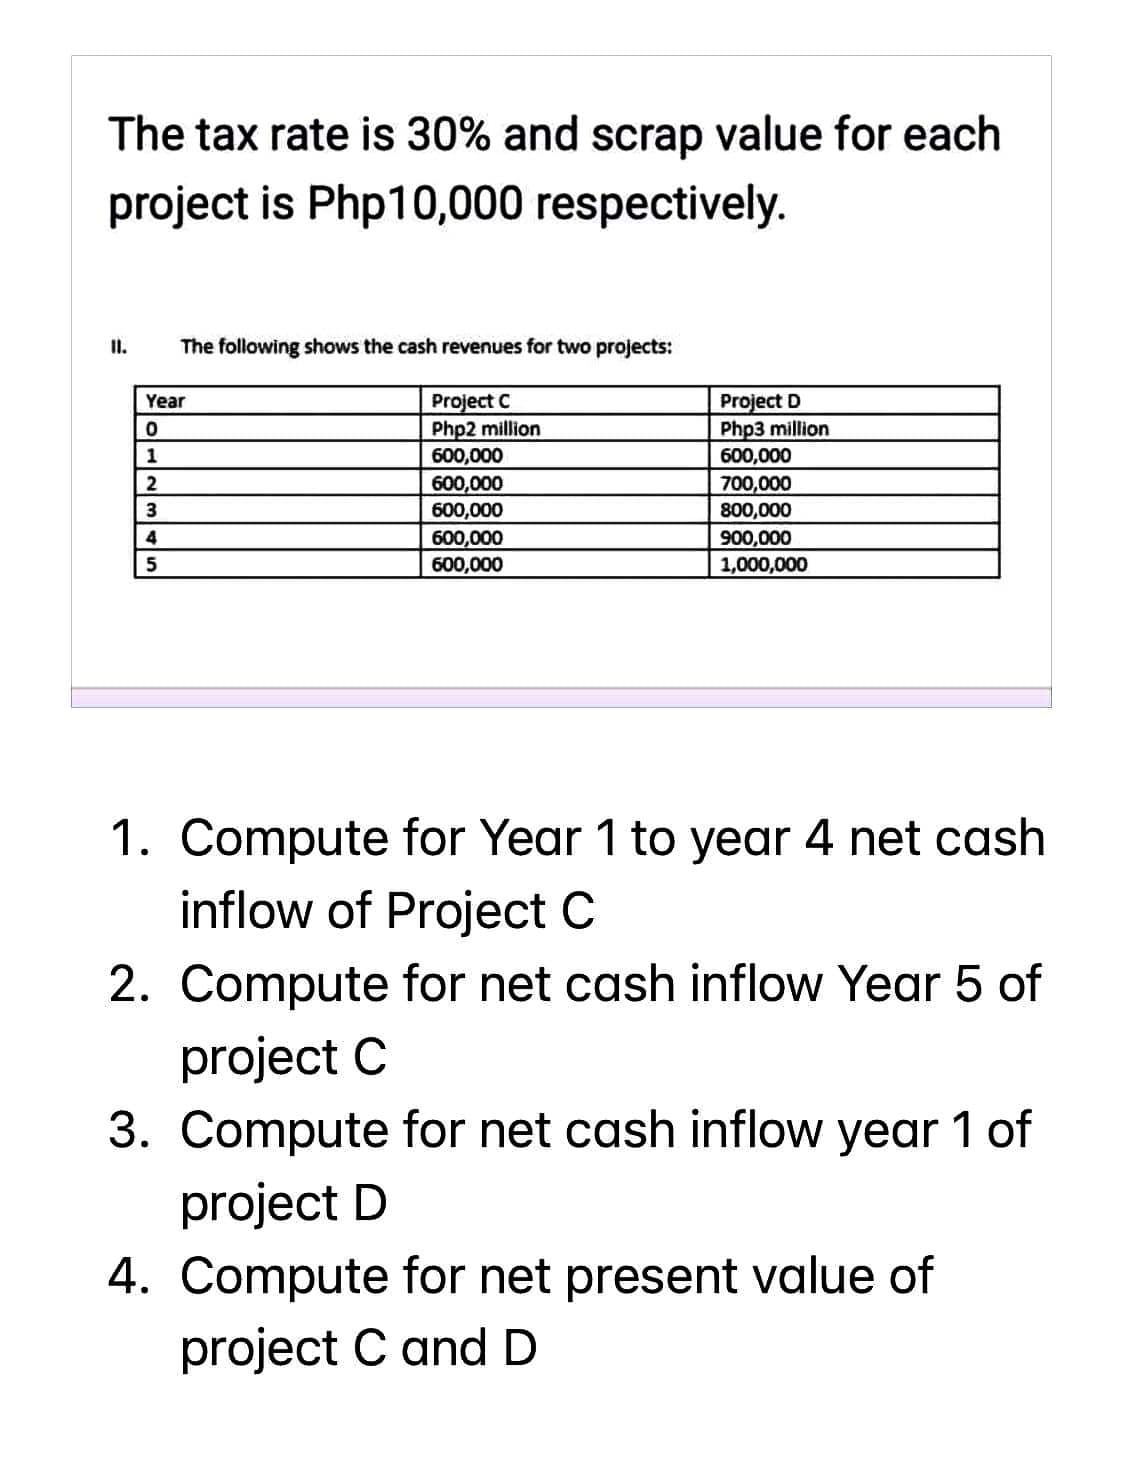 The tax rate is 30% and scrap value for each
project is Php10,000 respectively.
II.
The following shows the cash revenues for two projects:
Year
0
1
2
3
4
5
Project C
Php2 million
600,000
600,000
600,000
600,000
600,000
Project D
Php3 million
600,000
700,000
800,000
900,000
1,000,000
1. Compute for Year 1 to year 4 net cash
inflow of Project C
2. Compute for net cash inflow Year 5 of
project C
3. Compute for net cash inflow year 1 of
project D
4. Compute for net present value of
project C and D